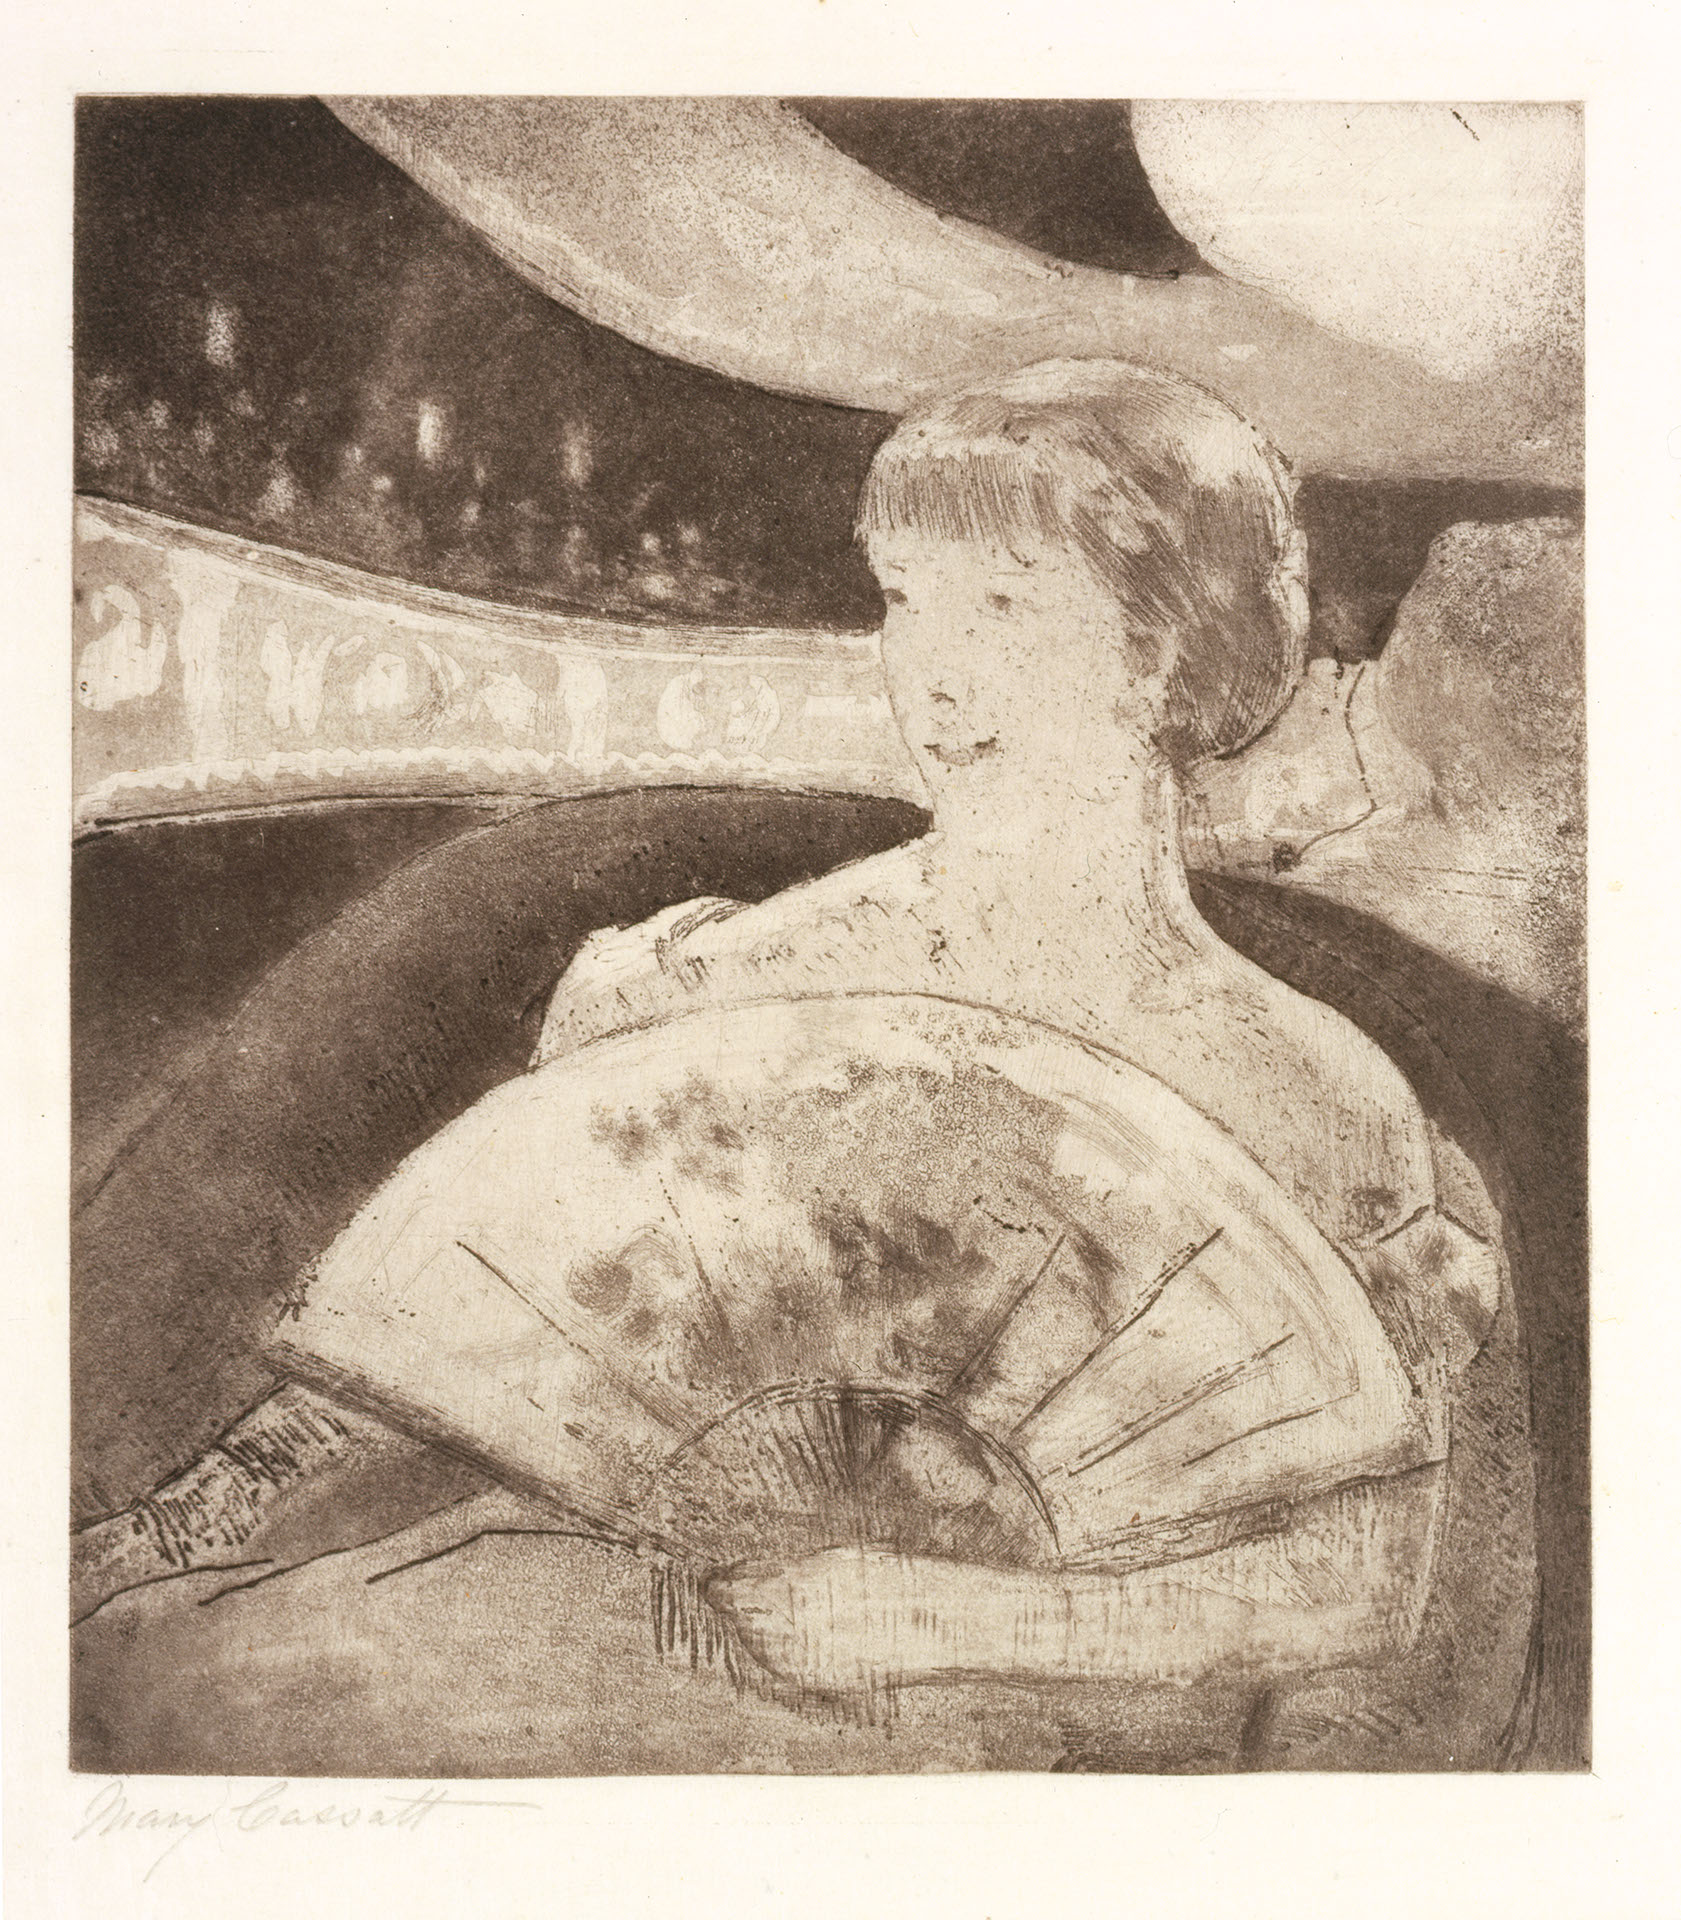 View of a woman holding a large fan in her lap seated in a plush chair at the theater